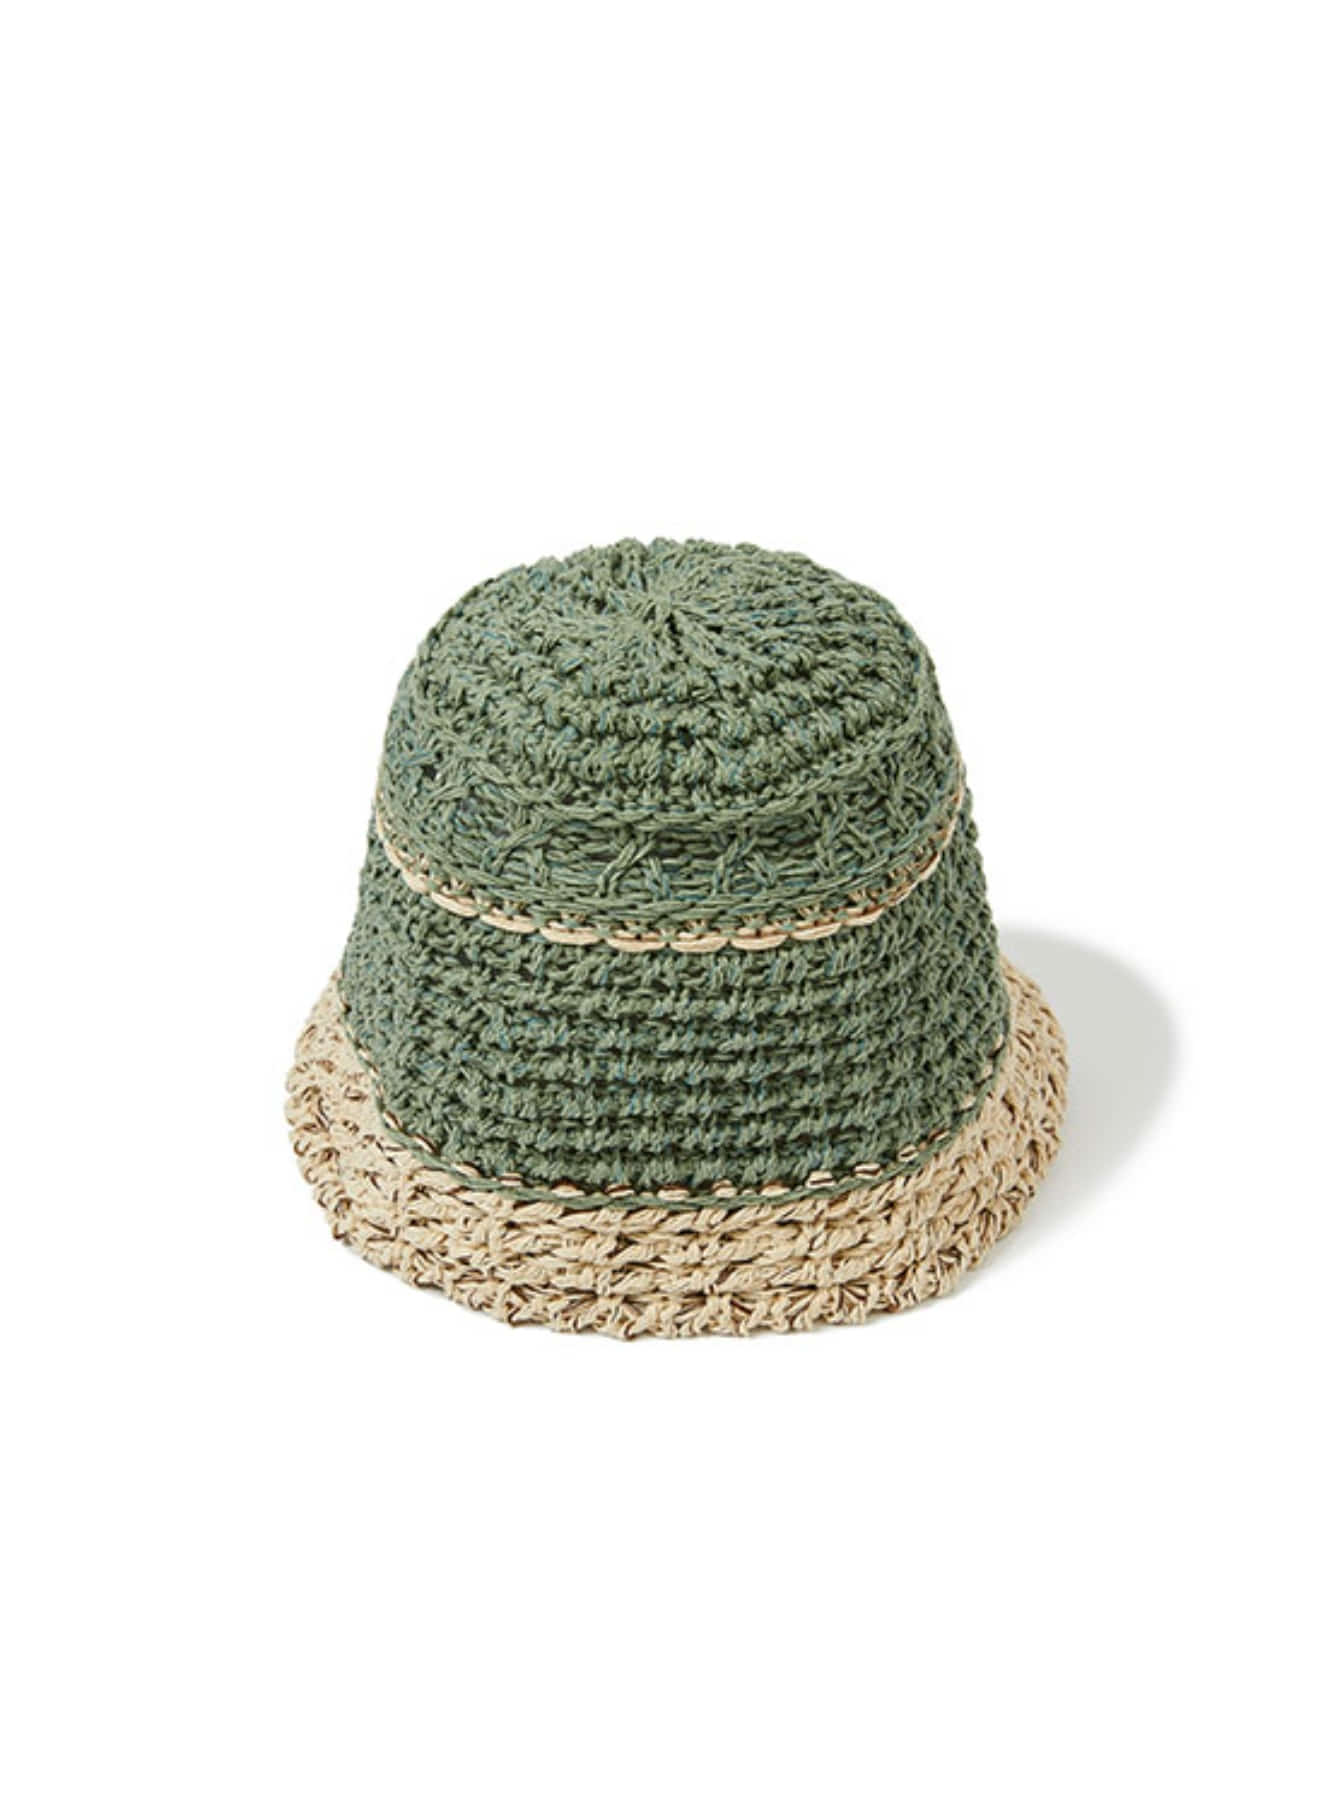 Knitted Hats in Mint VX2MA106-31